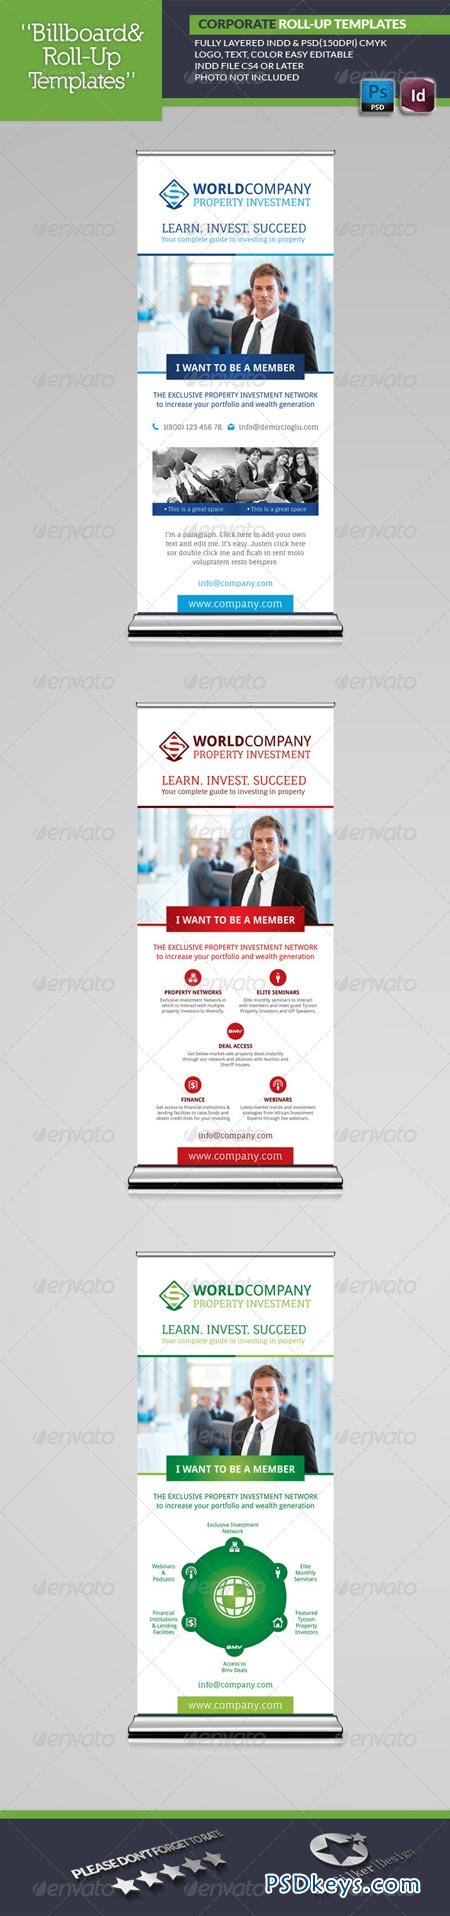 Corporate Roll-Up Templates 6899021